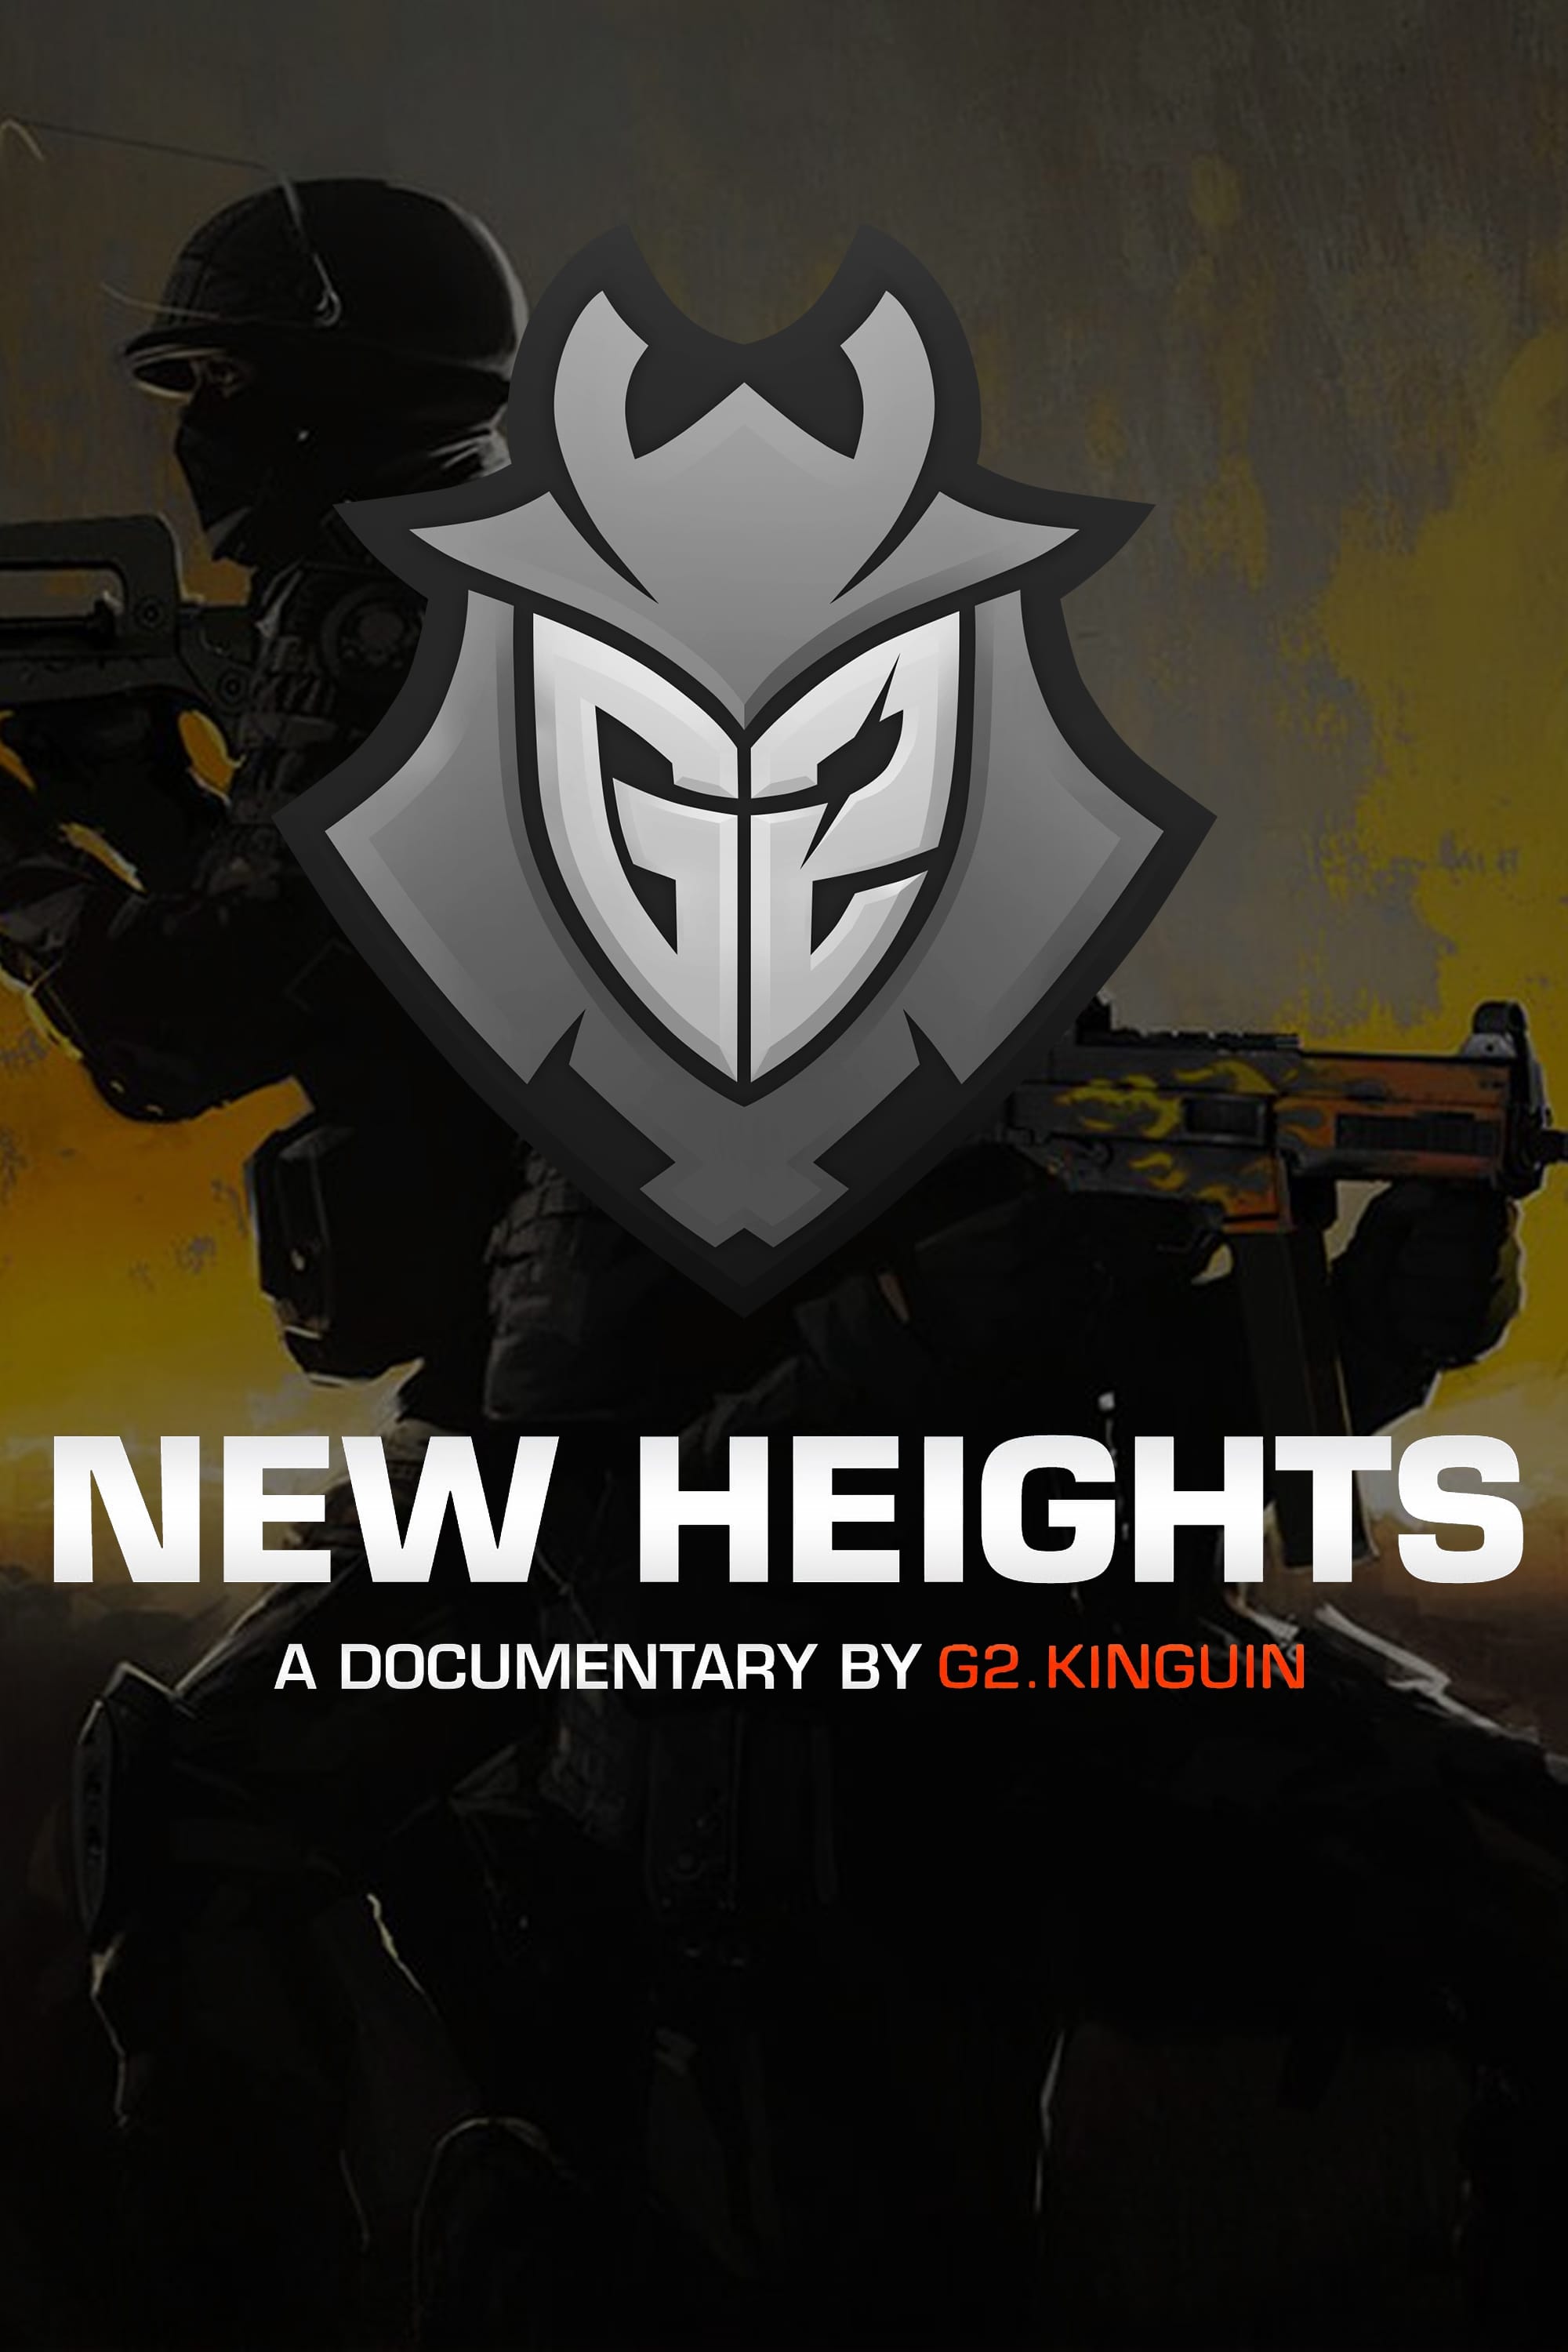 New Heights - A documentary by G2.Kinguin